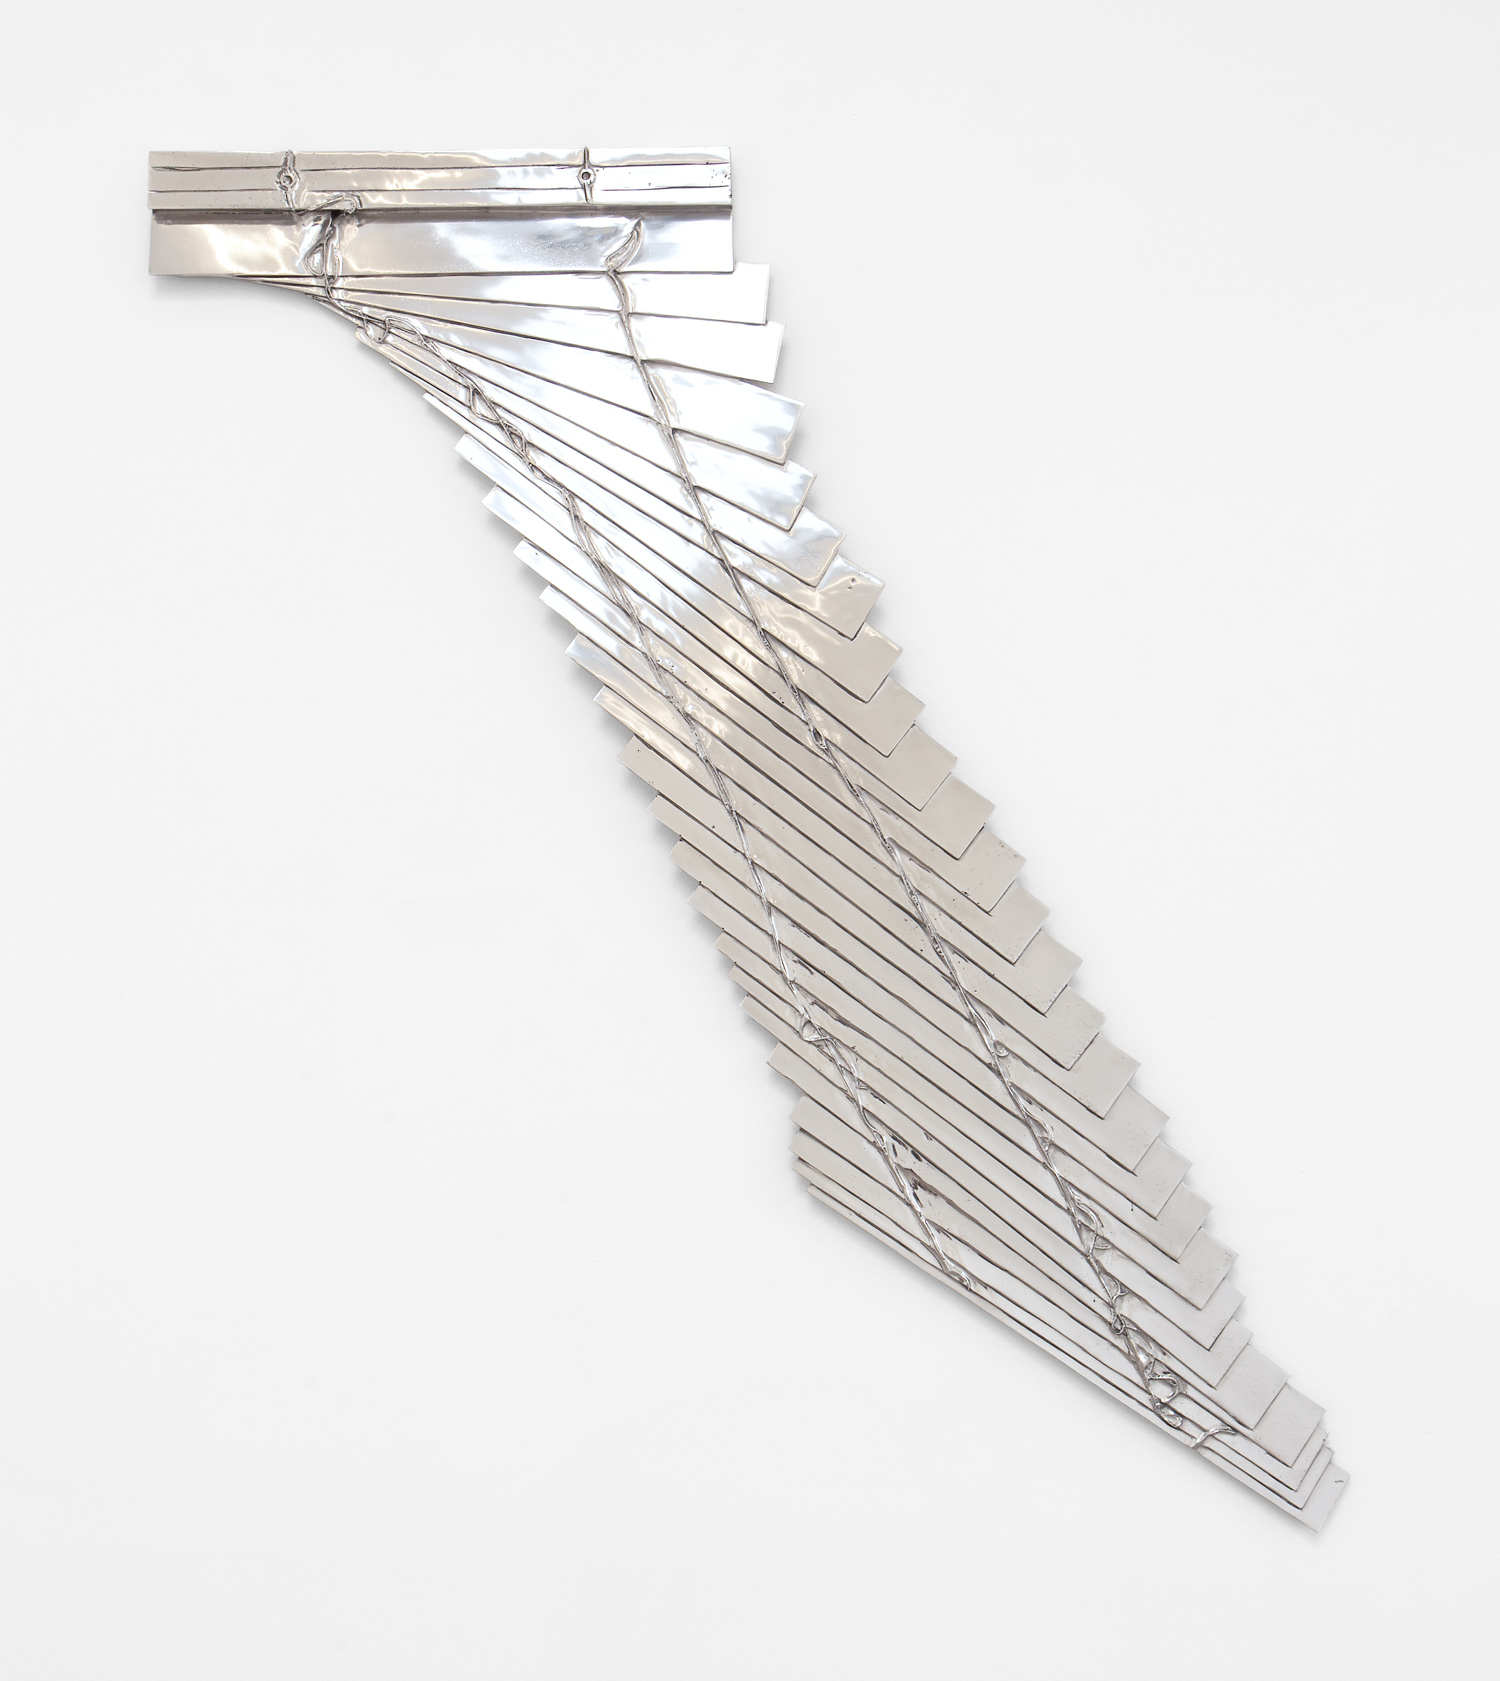 Anne Libby, Untitled, 2021, Polished cast aluminum, 56h x 34w in.